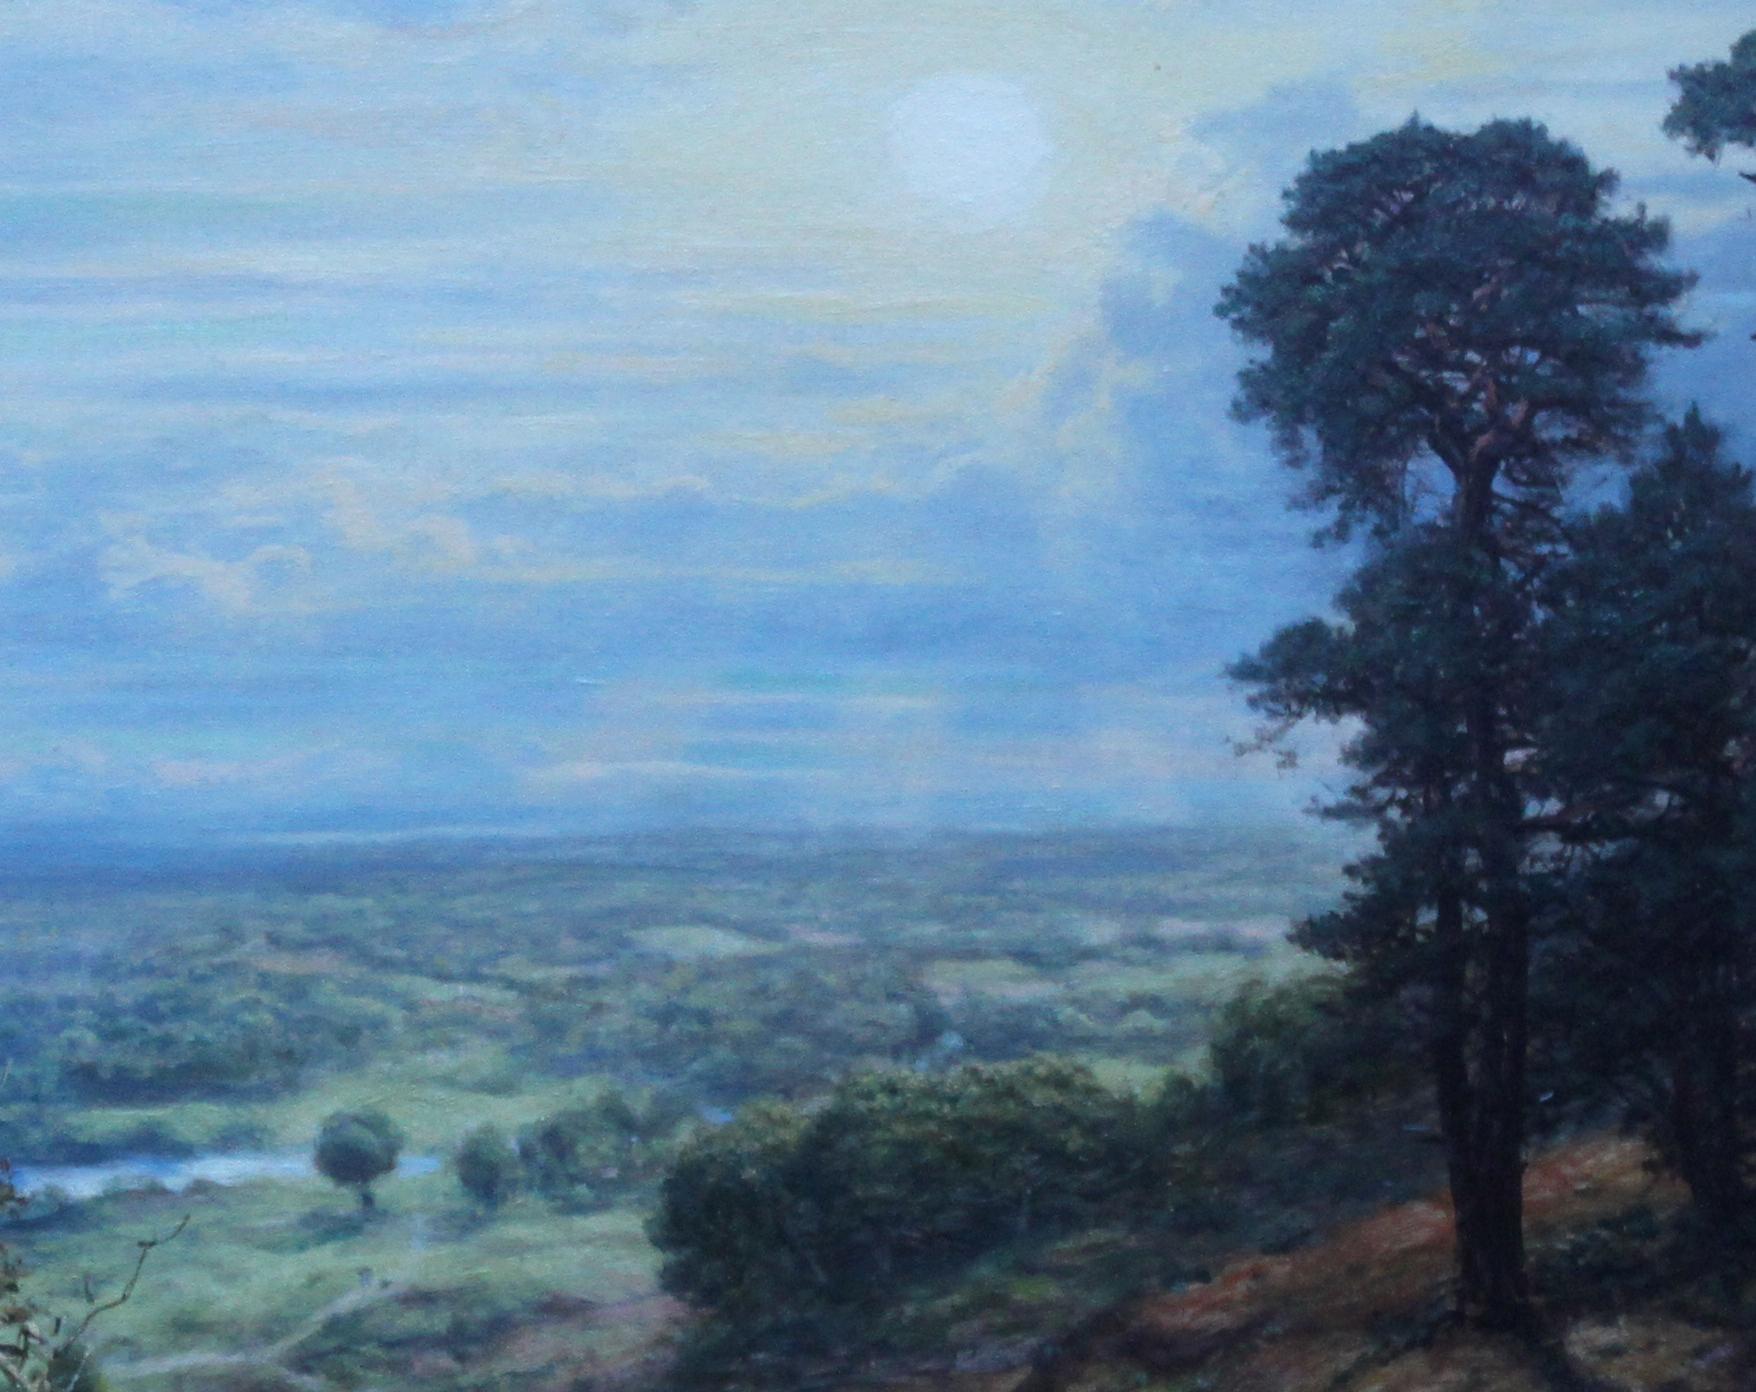 Sunset View from Coneyhurst Hill, Surrey - British 19thC landscape oil painting - Realist Painting by George William Mote